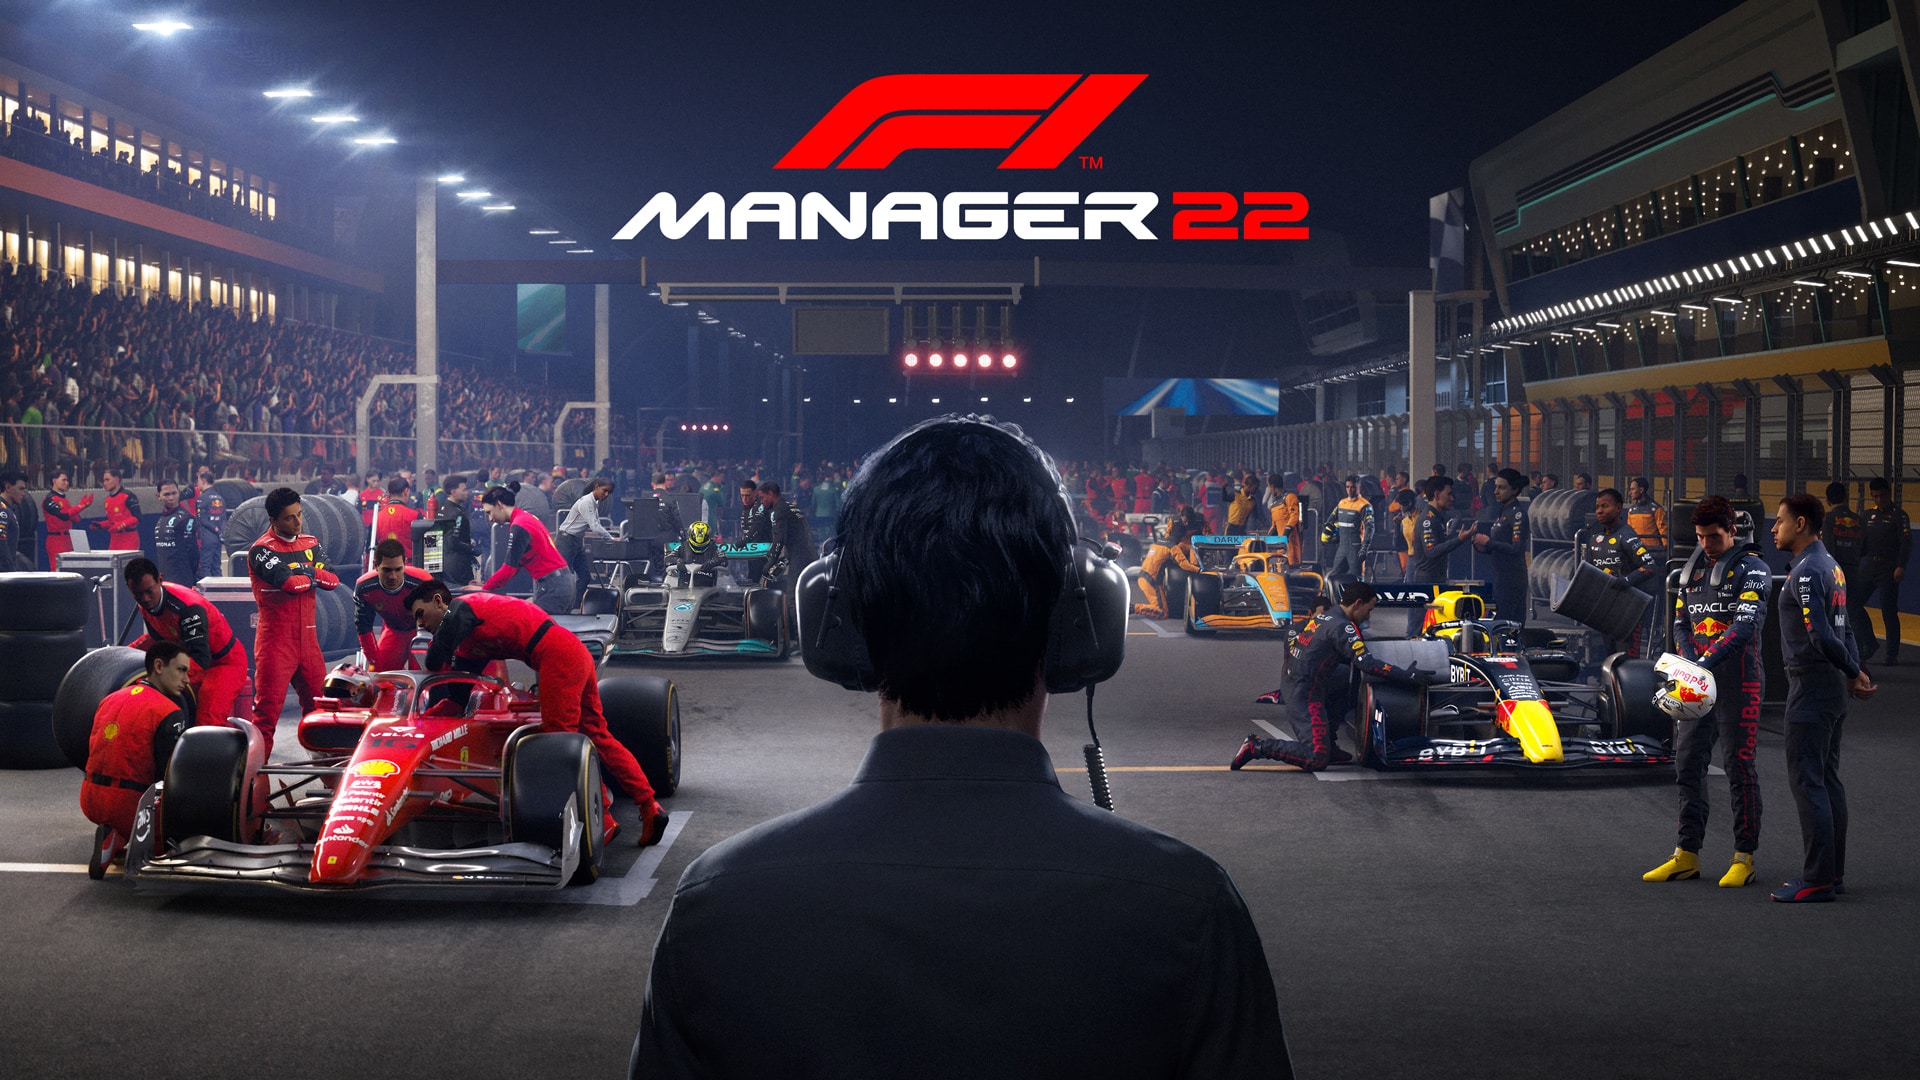 f1 manager 2022 update 1.06